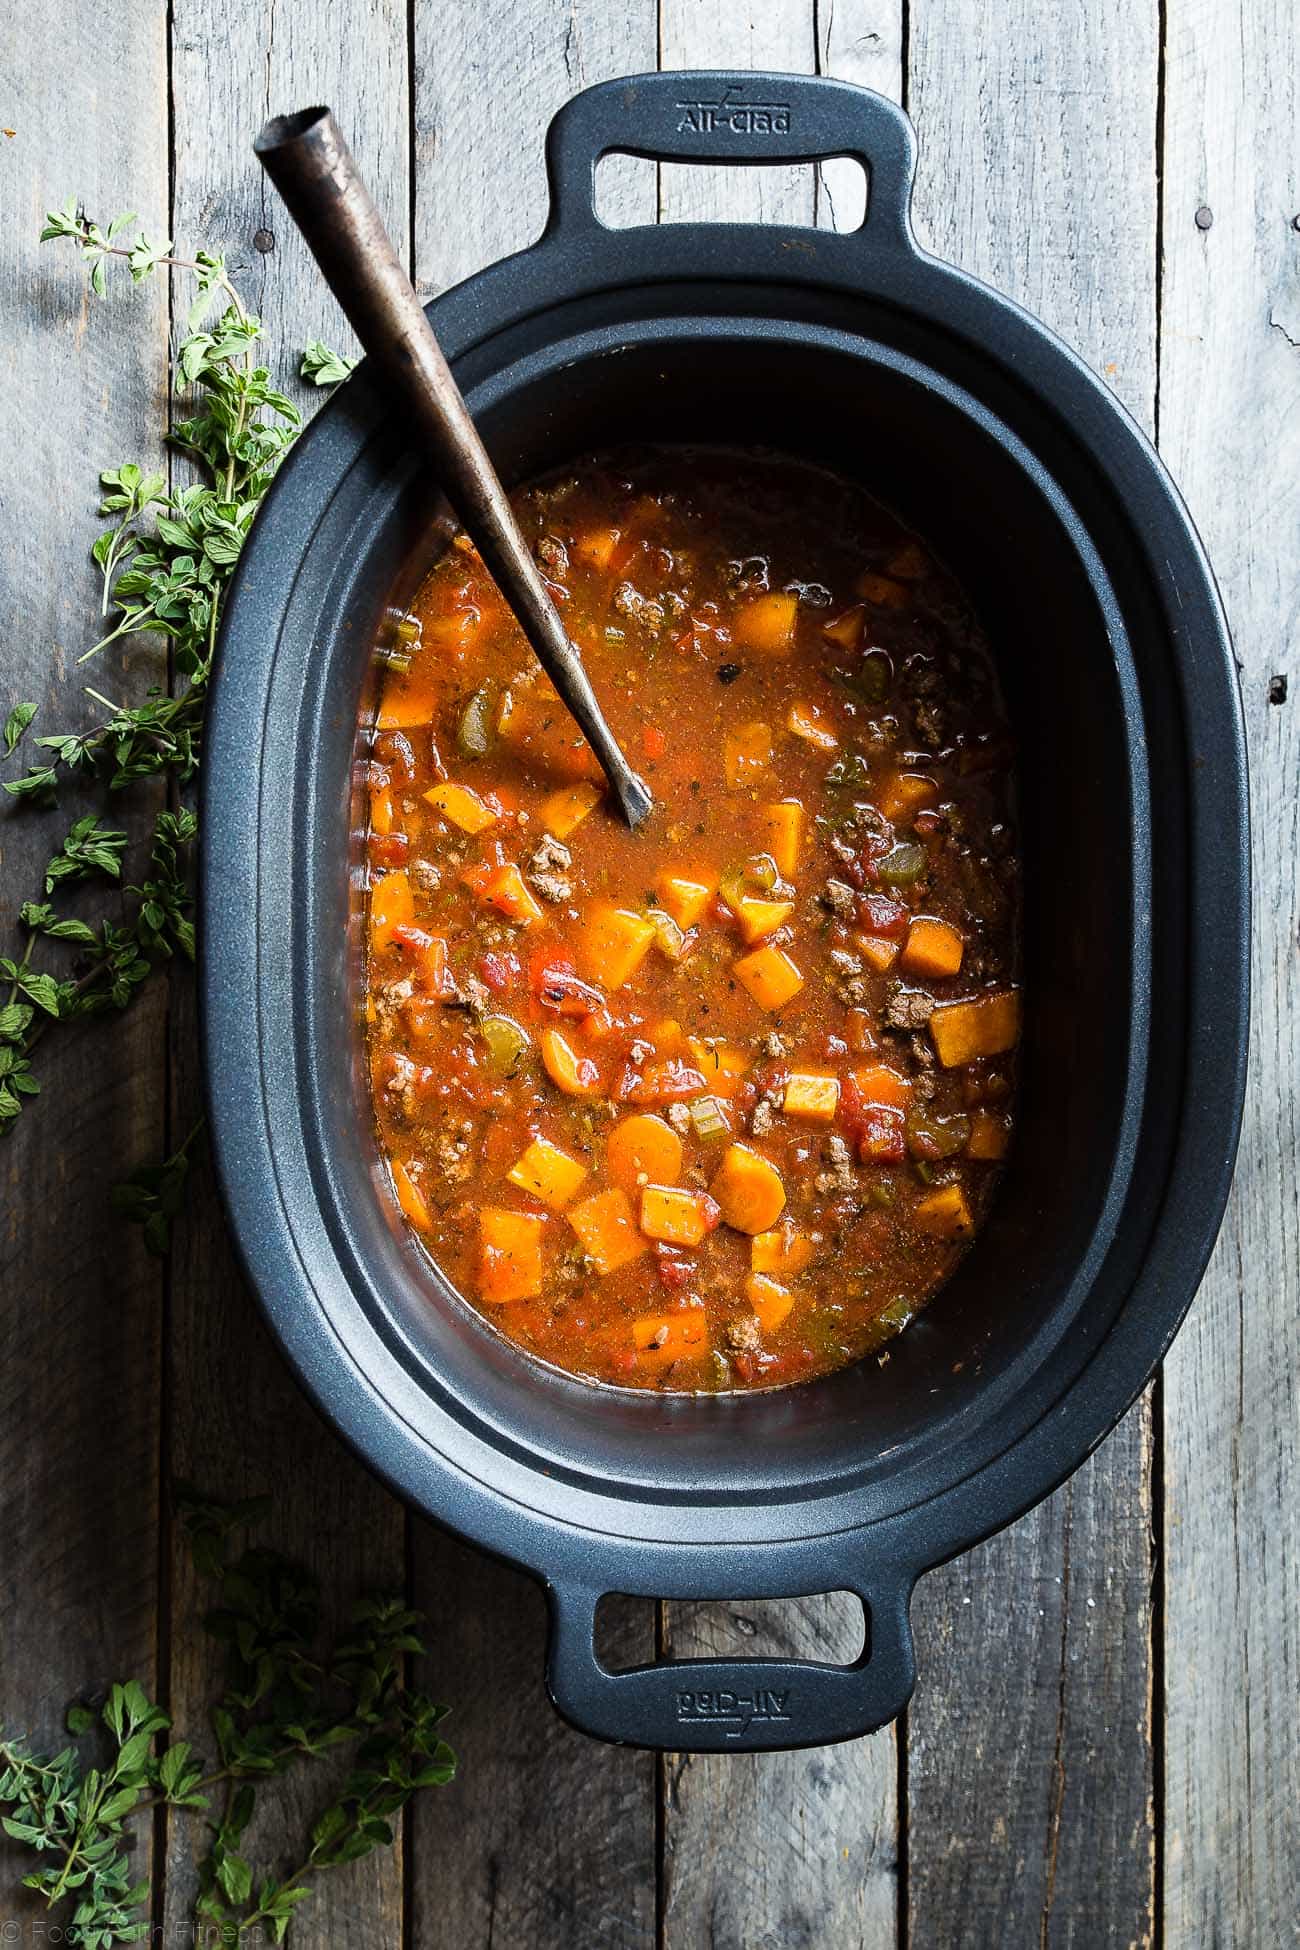 Crock Pot Paleo Hamburger Soup Recipe -  This easy, healthy hamburger soup is made in the slow cooker and is a grain/dairy/sugar/gluten free and whole30 dinner that the whole family will love! Makes great leftovers too!  | Foodfaithfitness.com | @FoodFaithFit